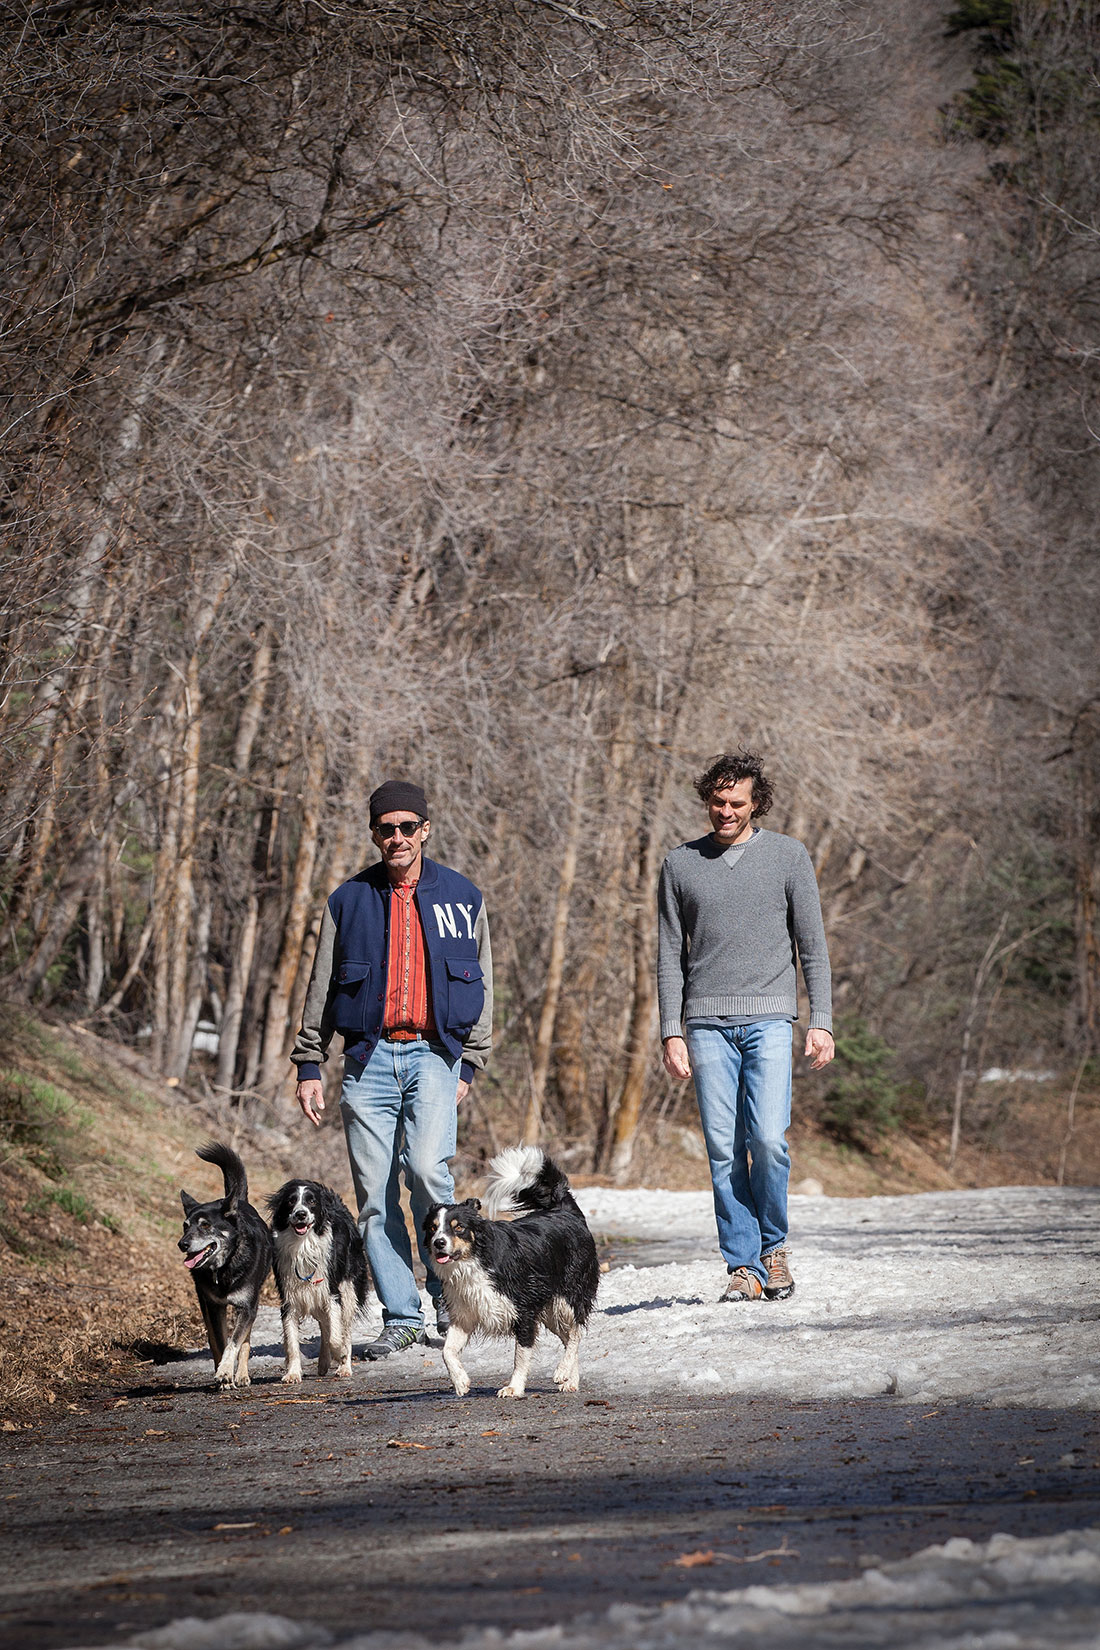 Dr. Brent Olson and Dr. Jeff Nichols with dogs